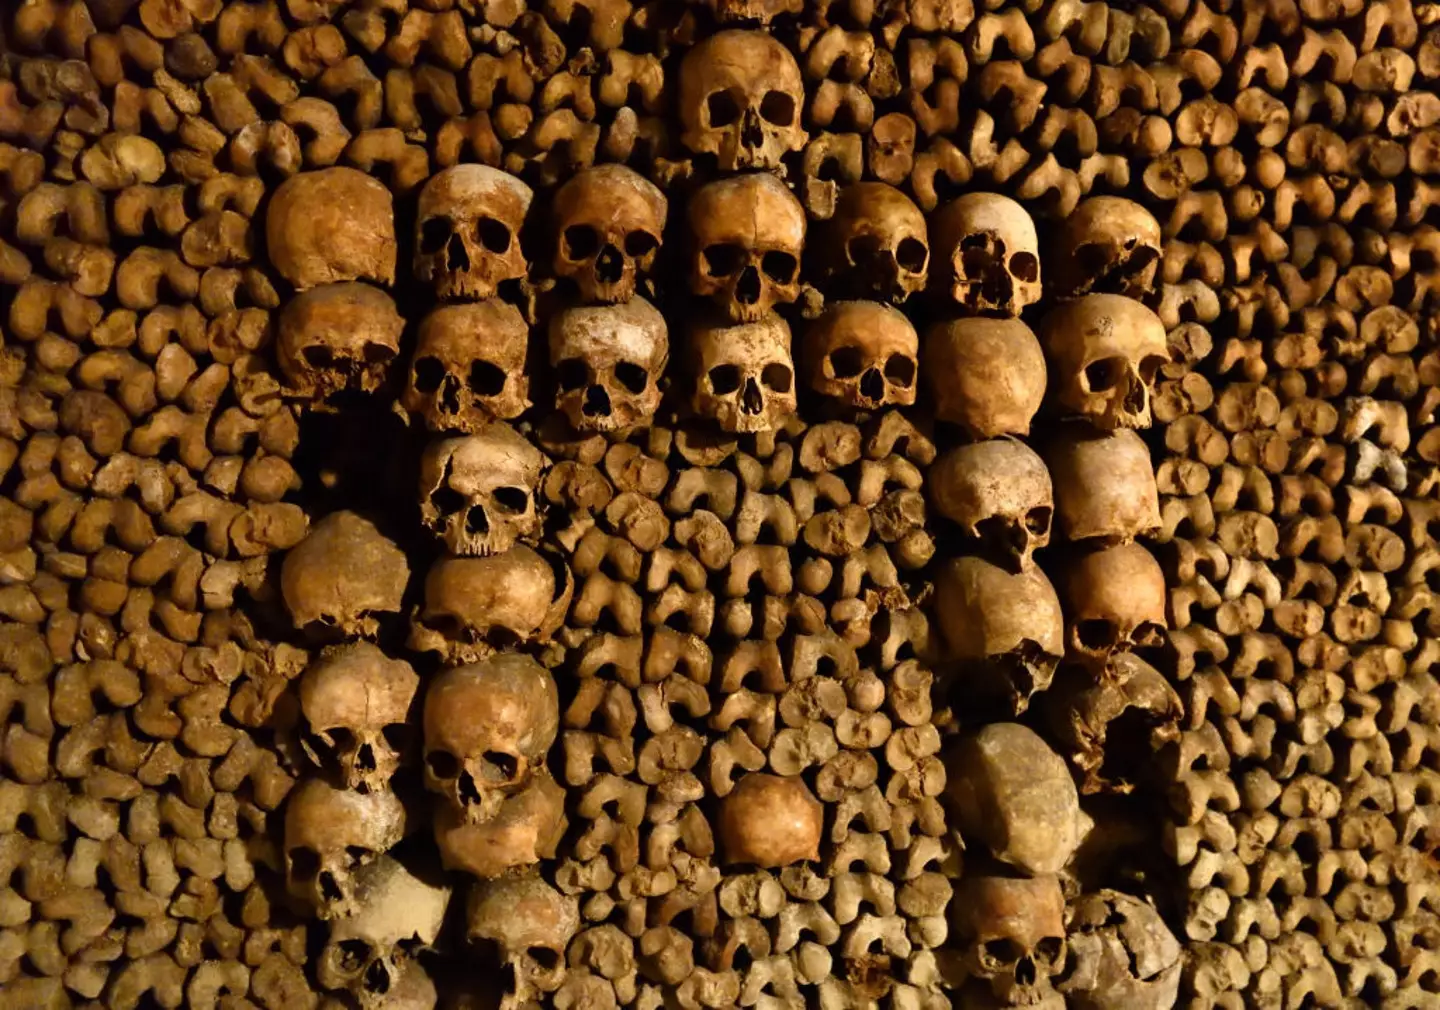 More than six million skeletons are housed underneath the streets of Paris.